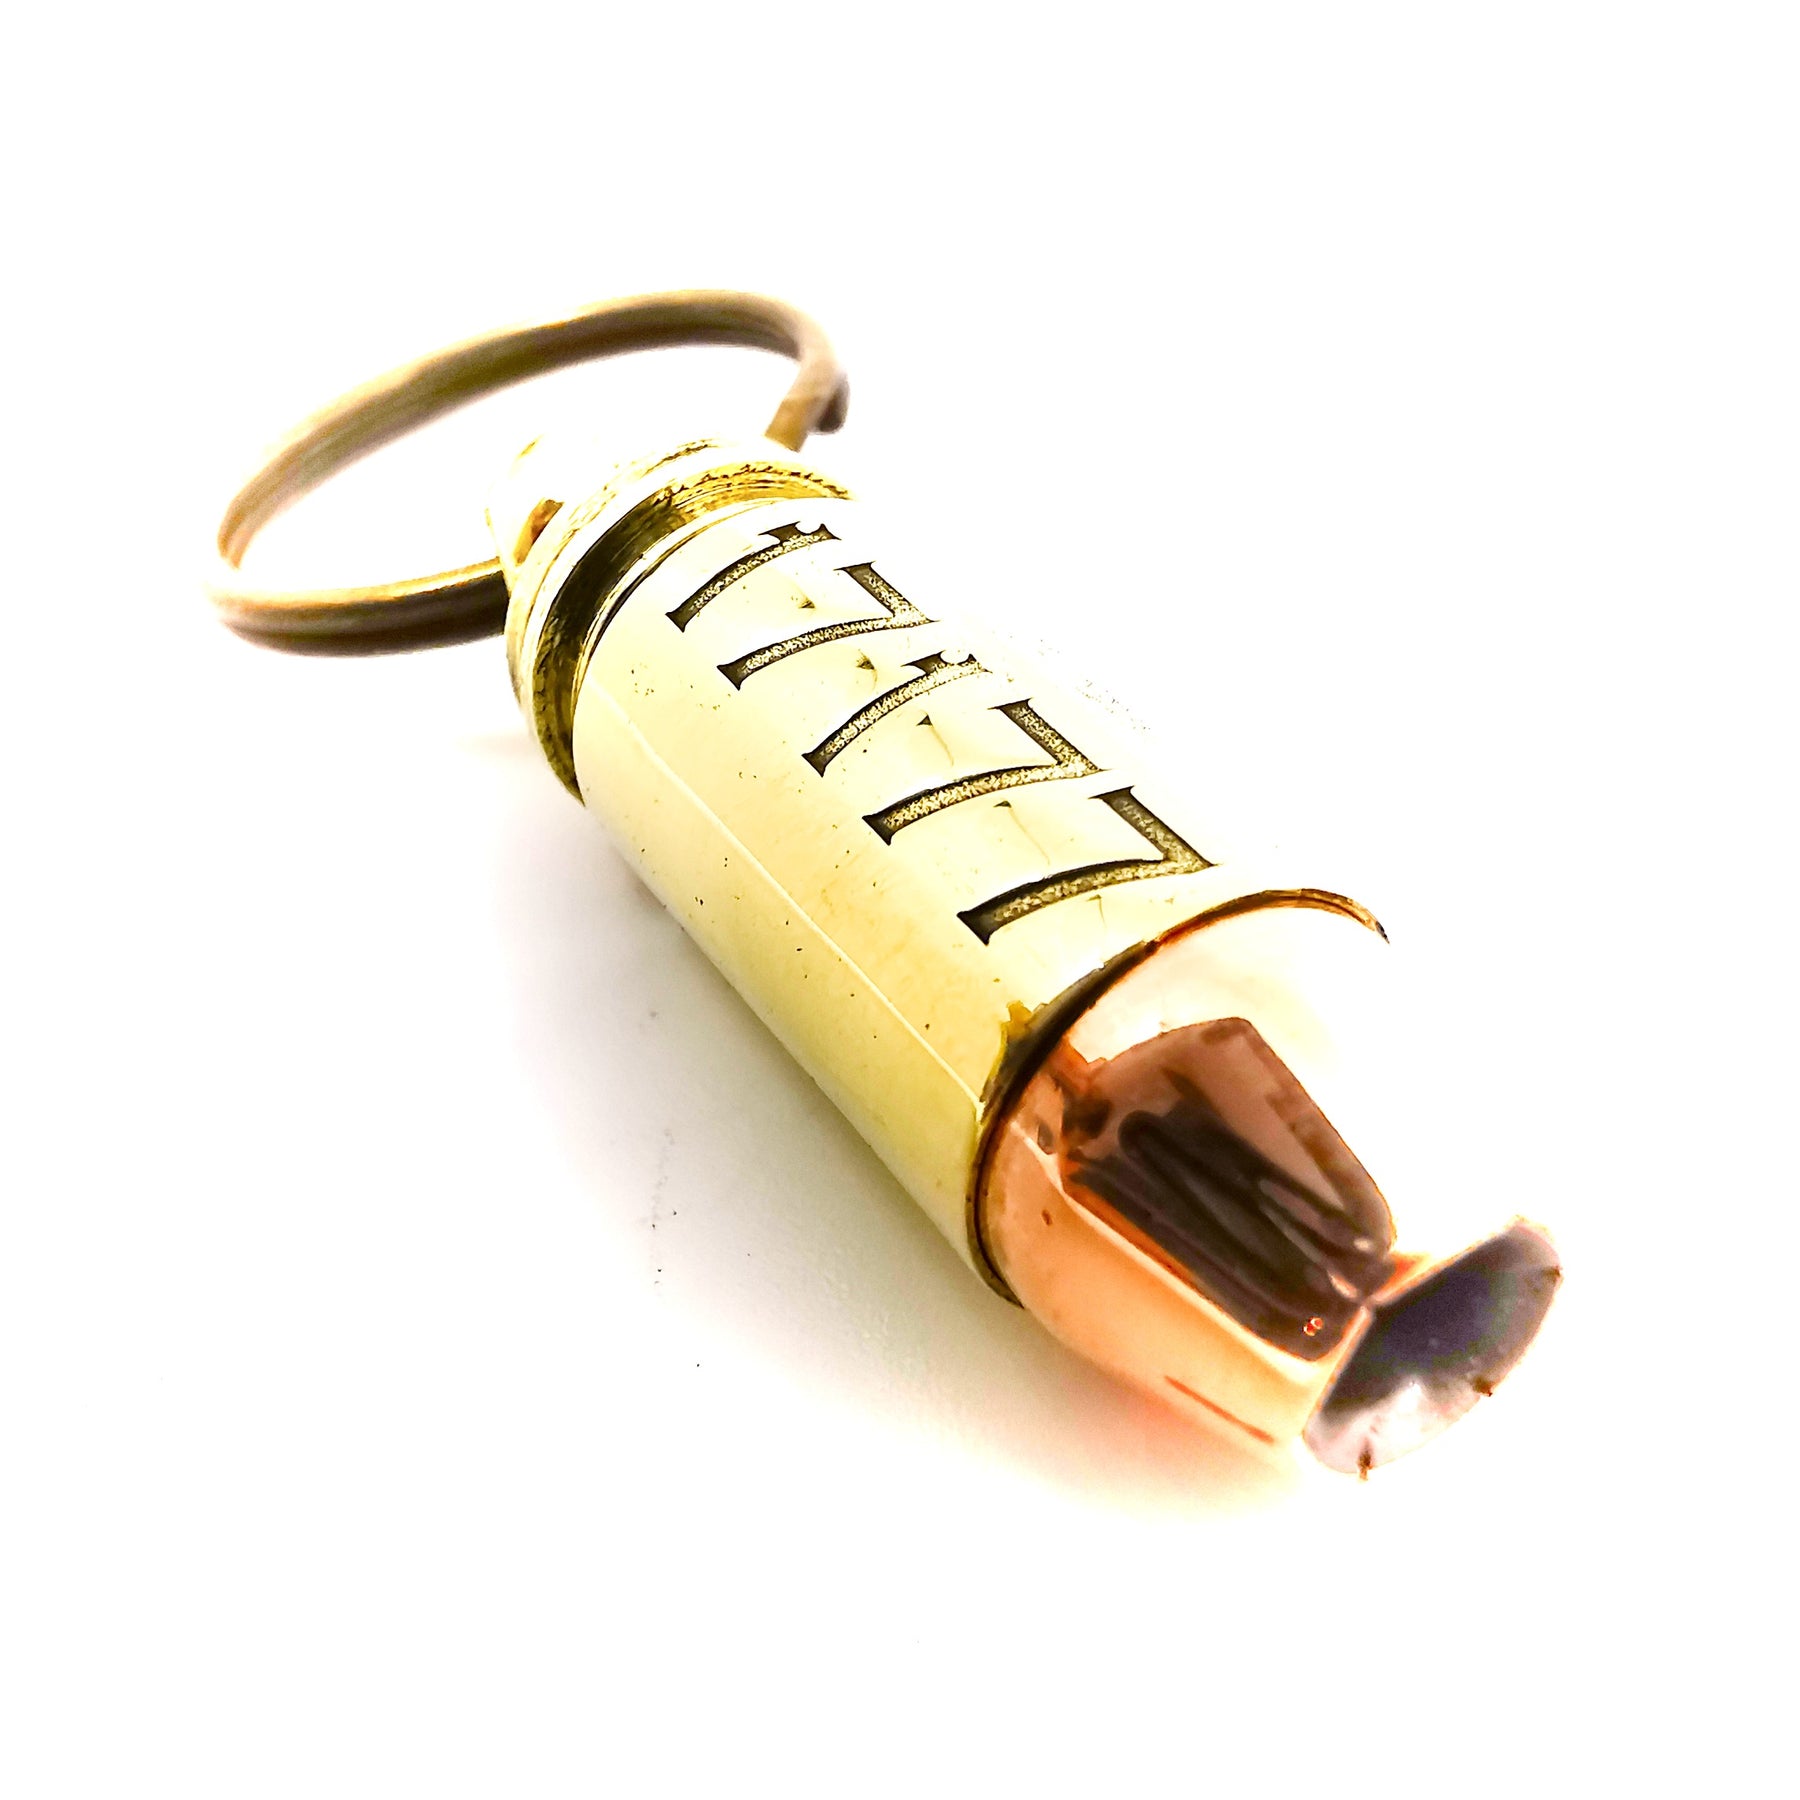 The 9mm Hollow point Key Ring